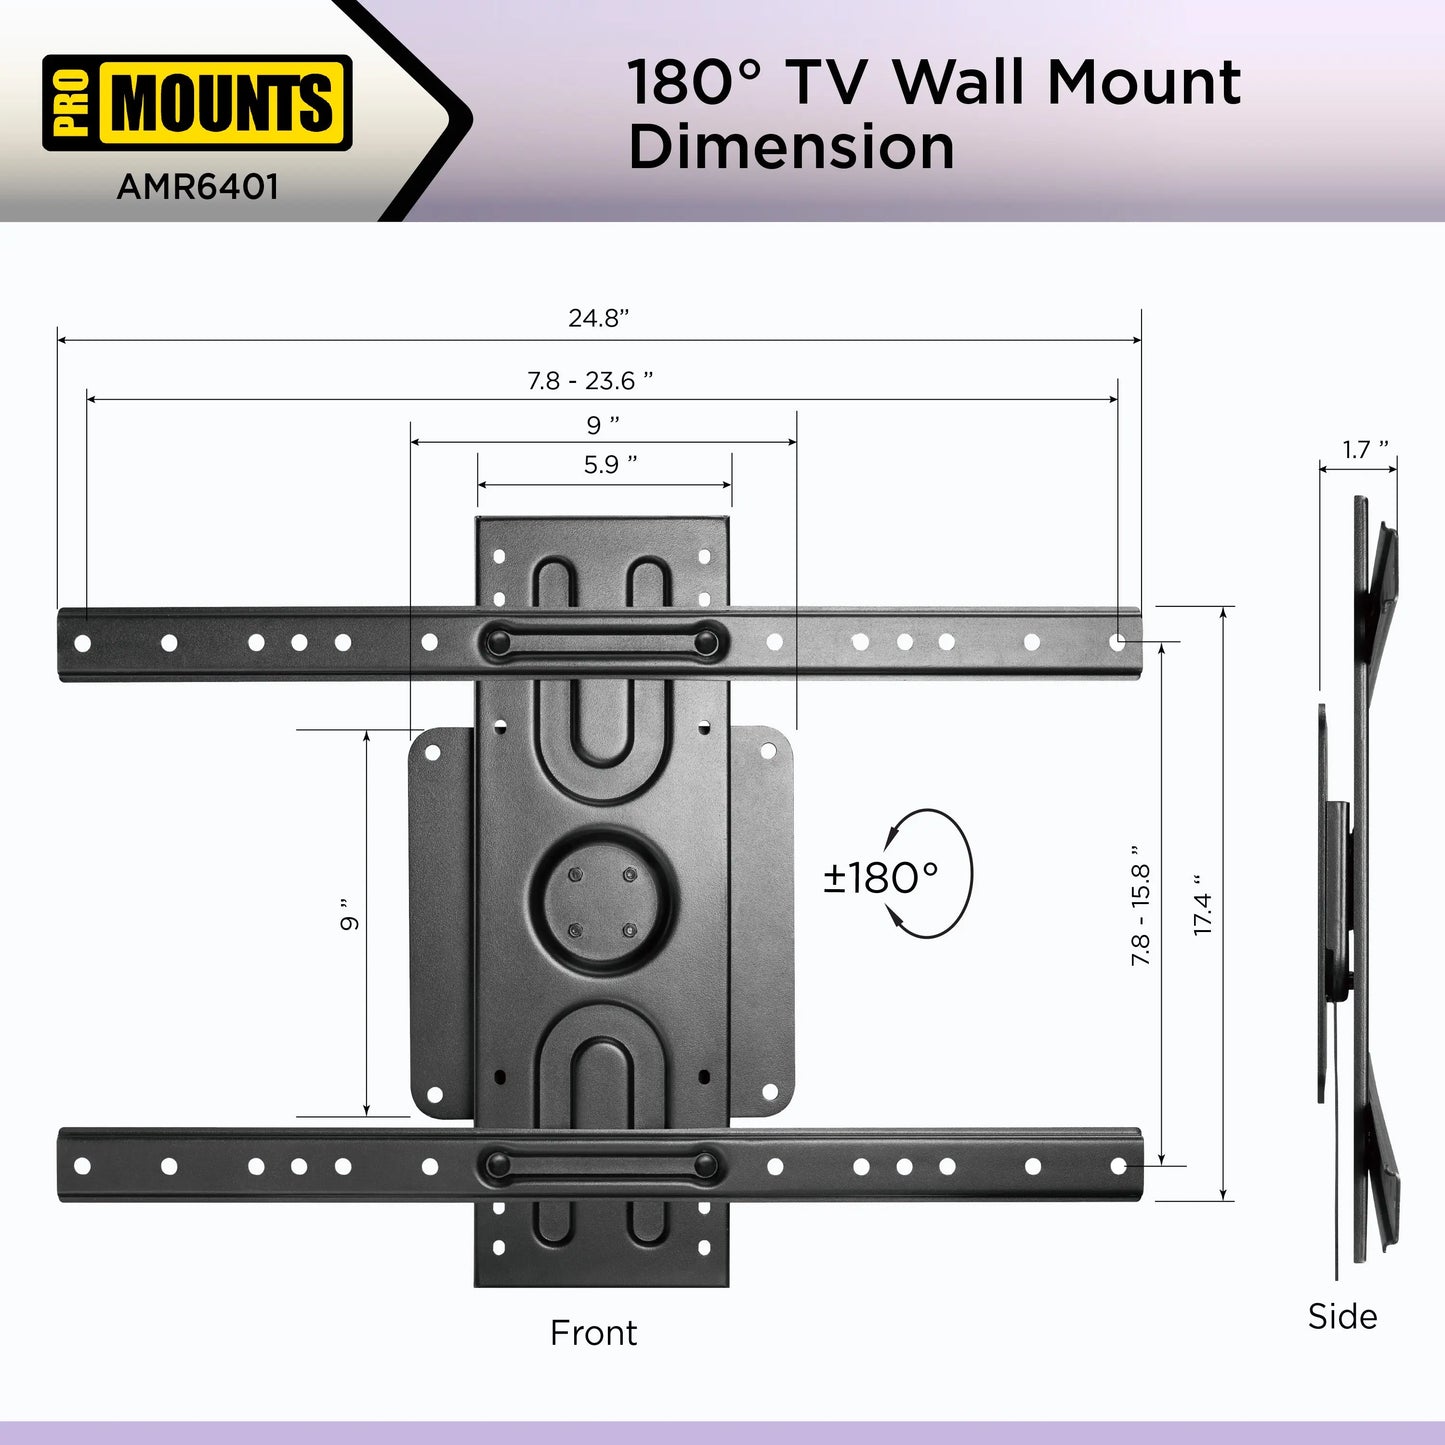 ProMounts Landscape to Portrait Rotating TV Wall Mount for TVs 37”-85” and up to 110lbs (AMR6401)